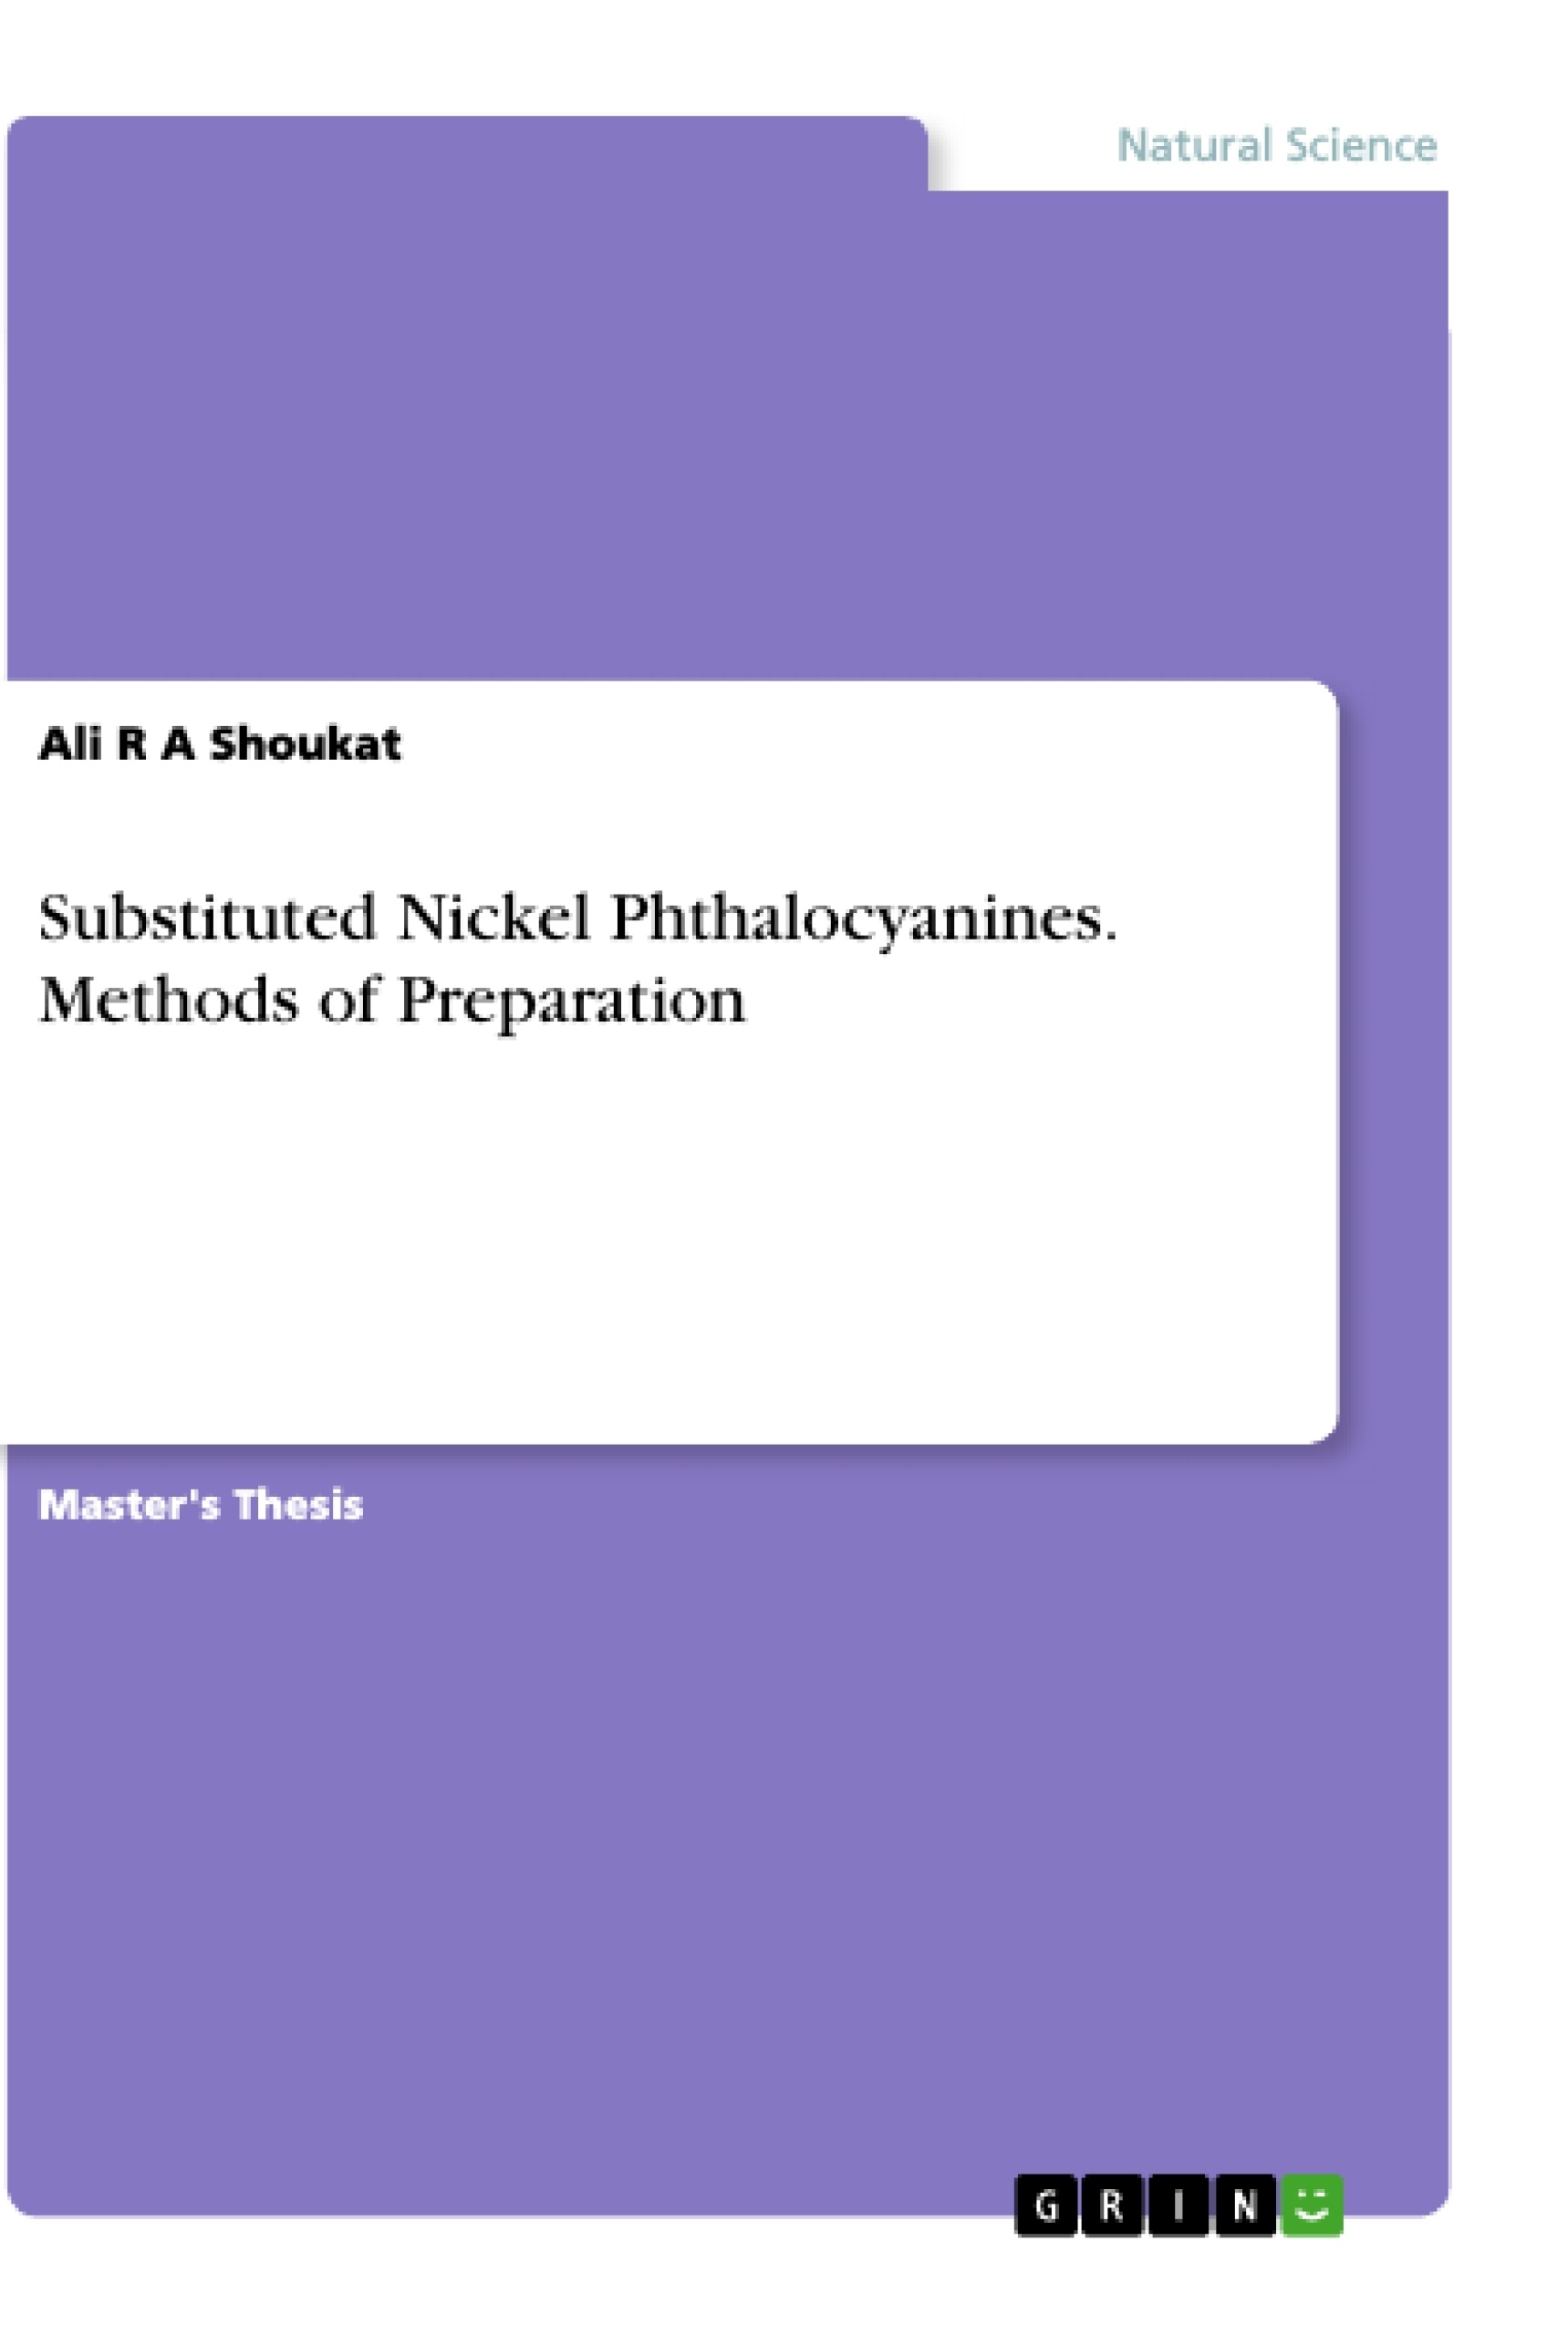 Title: Substituted Nickel Phthalocyanines. Methods of Preparation